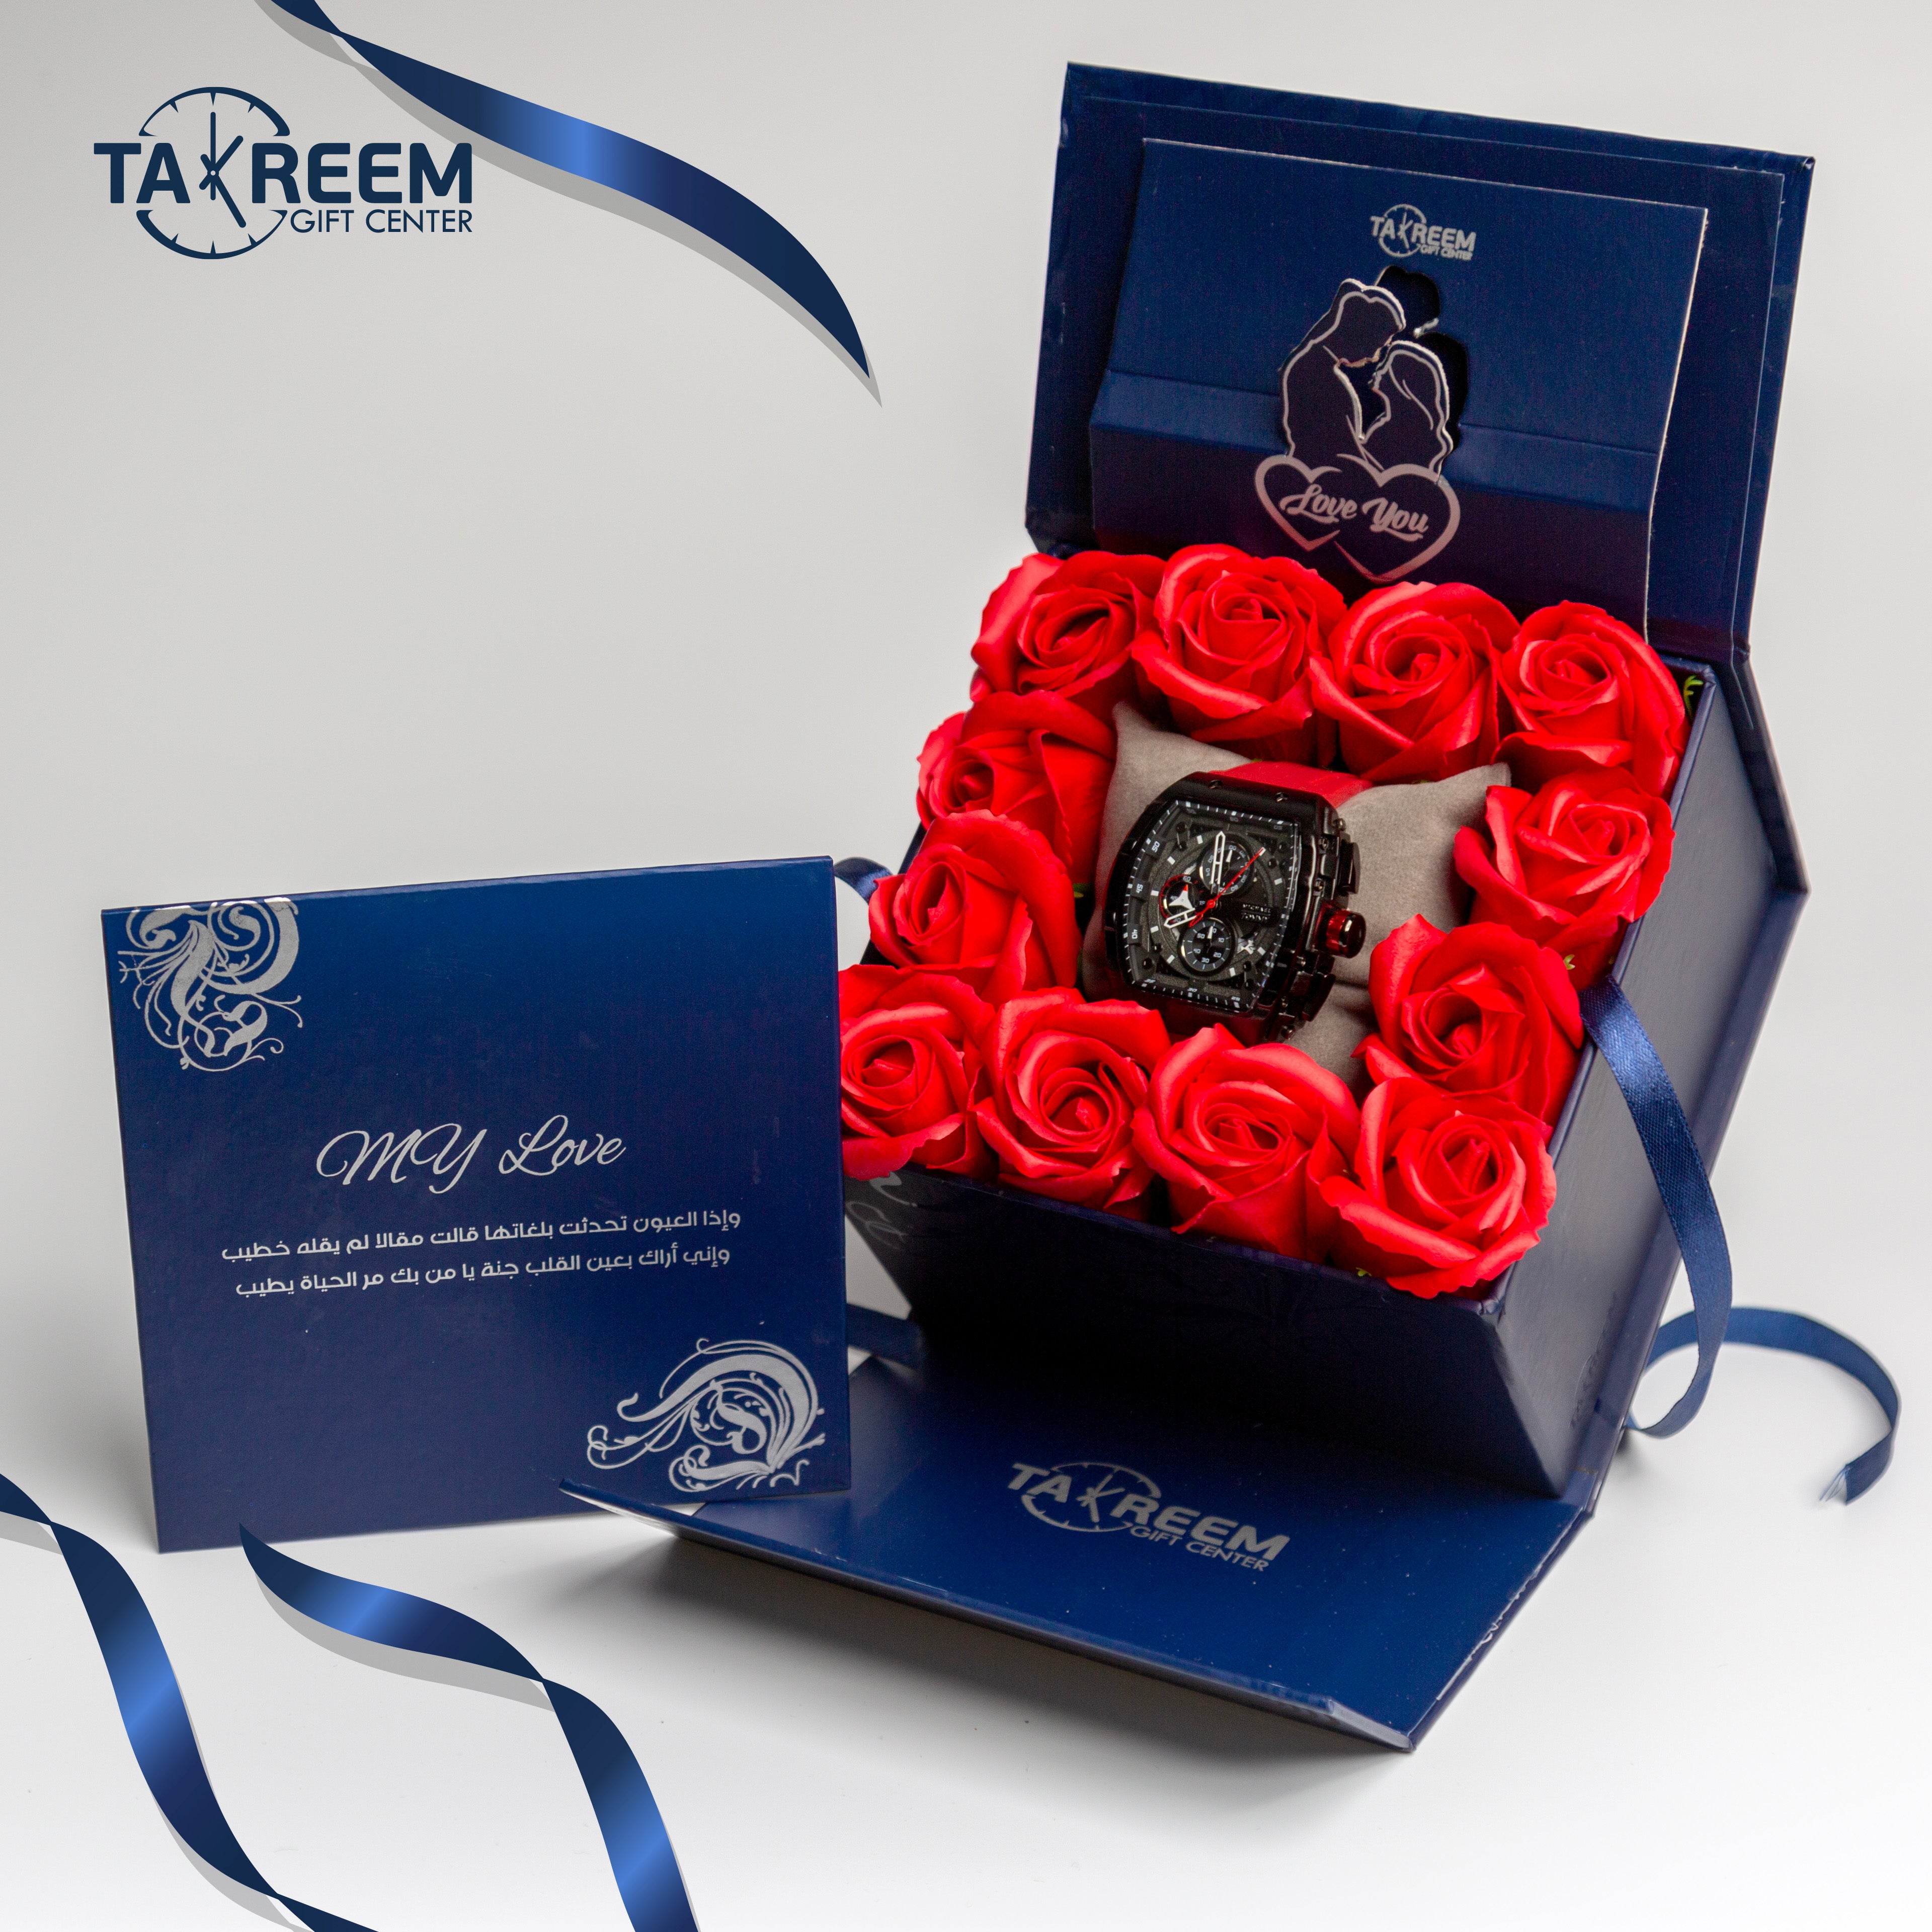 Small Smile1 Gift Boxes By Takreem Gifts Center